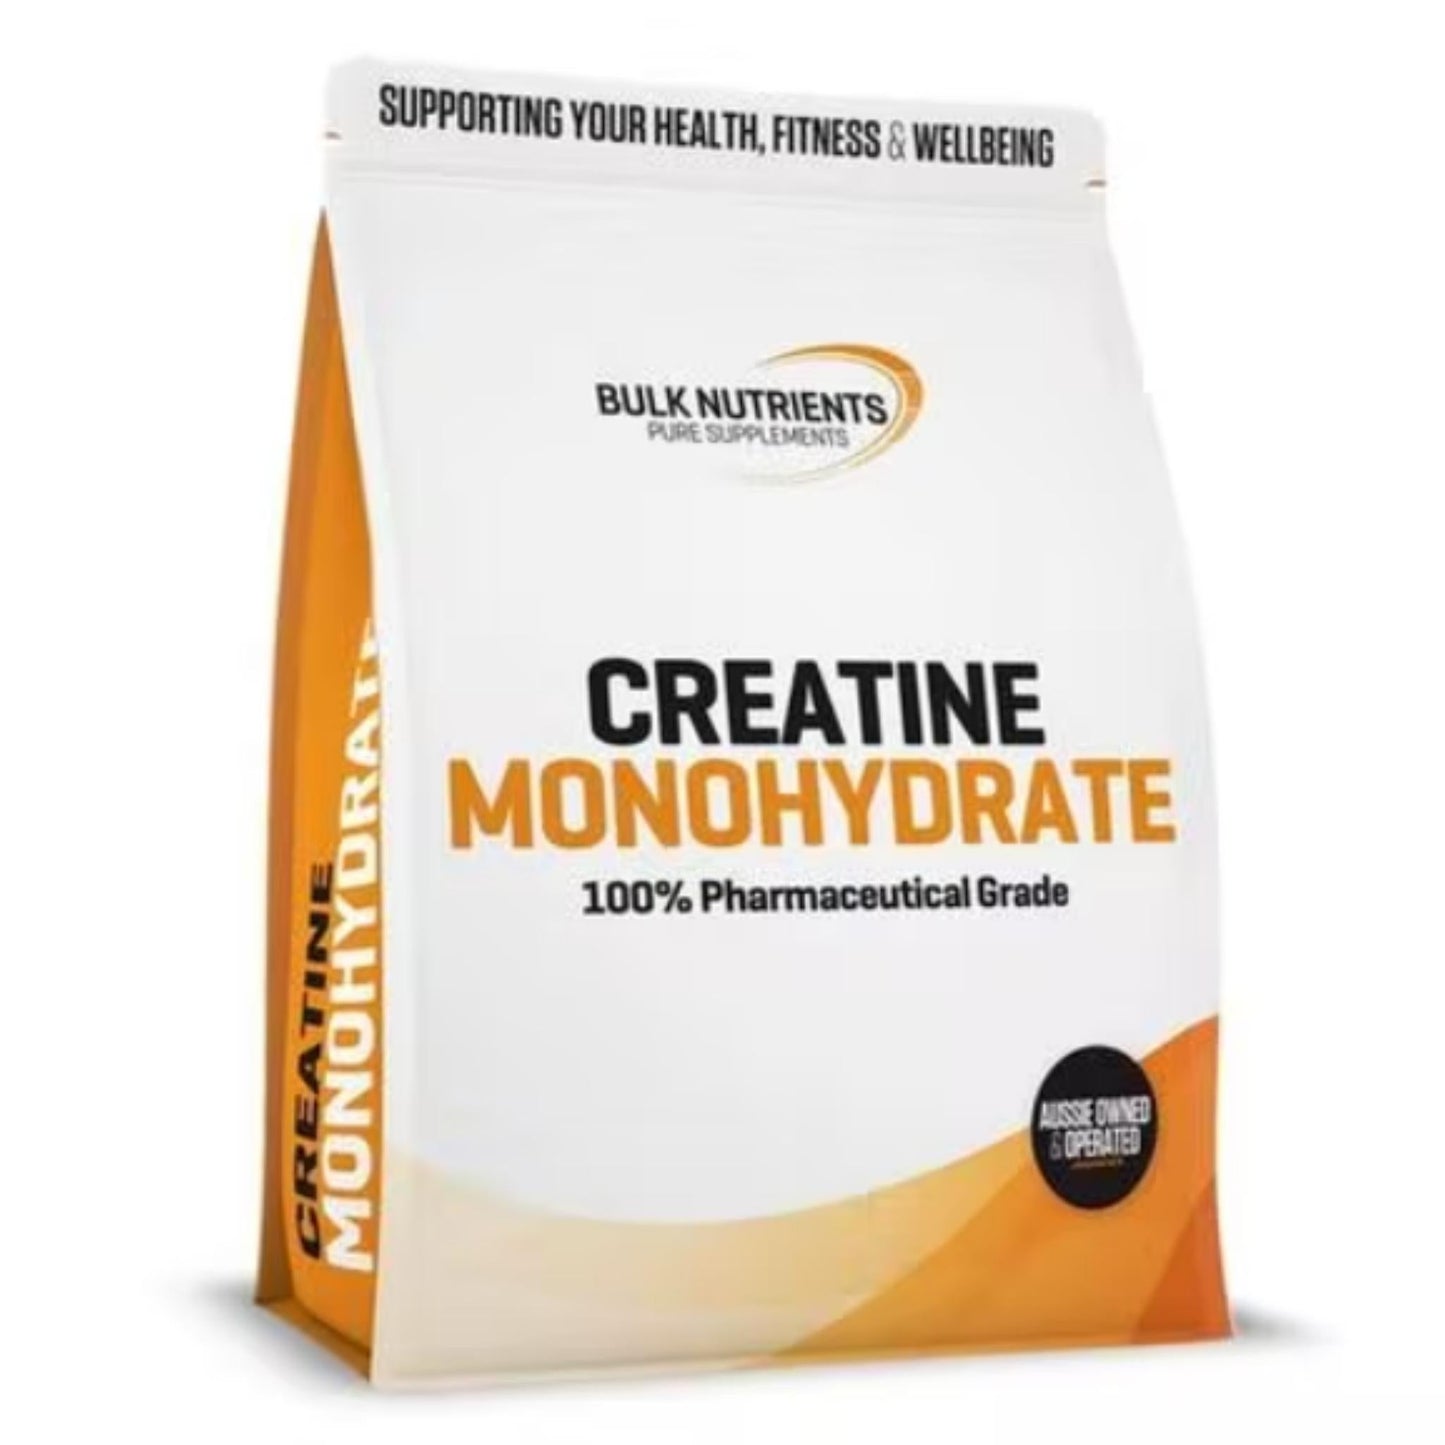 Bulk Nutrients - Creatine Monohydrate - Supplements - 250g - The Cave Gym